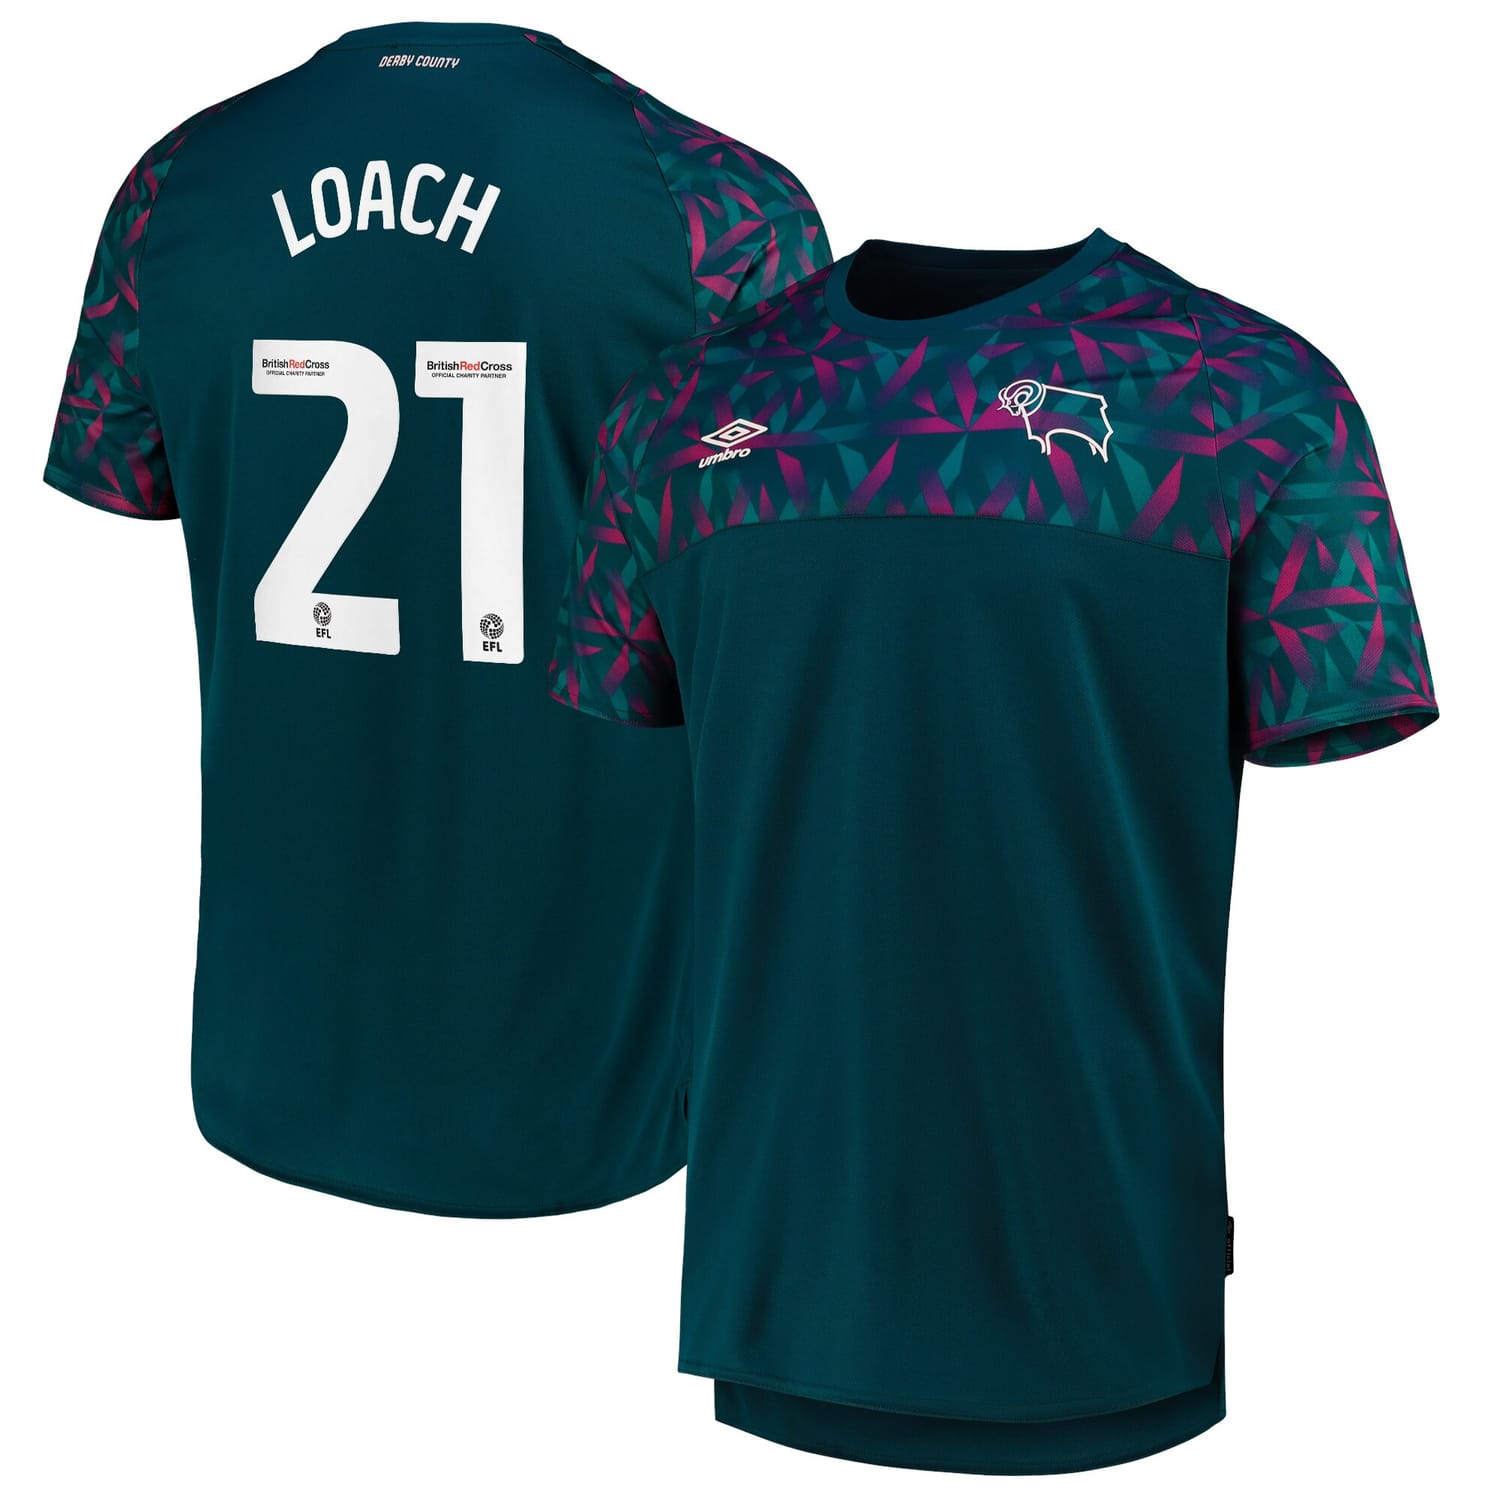 EFL League One Derby County Home Goalkeeper Jersey Shirt 2022-23 player Loach 21 printing for Men